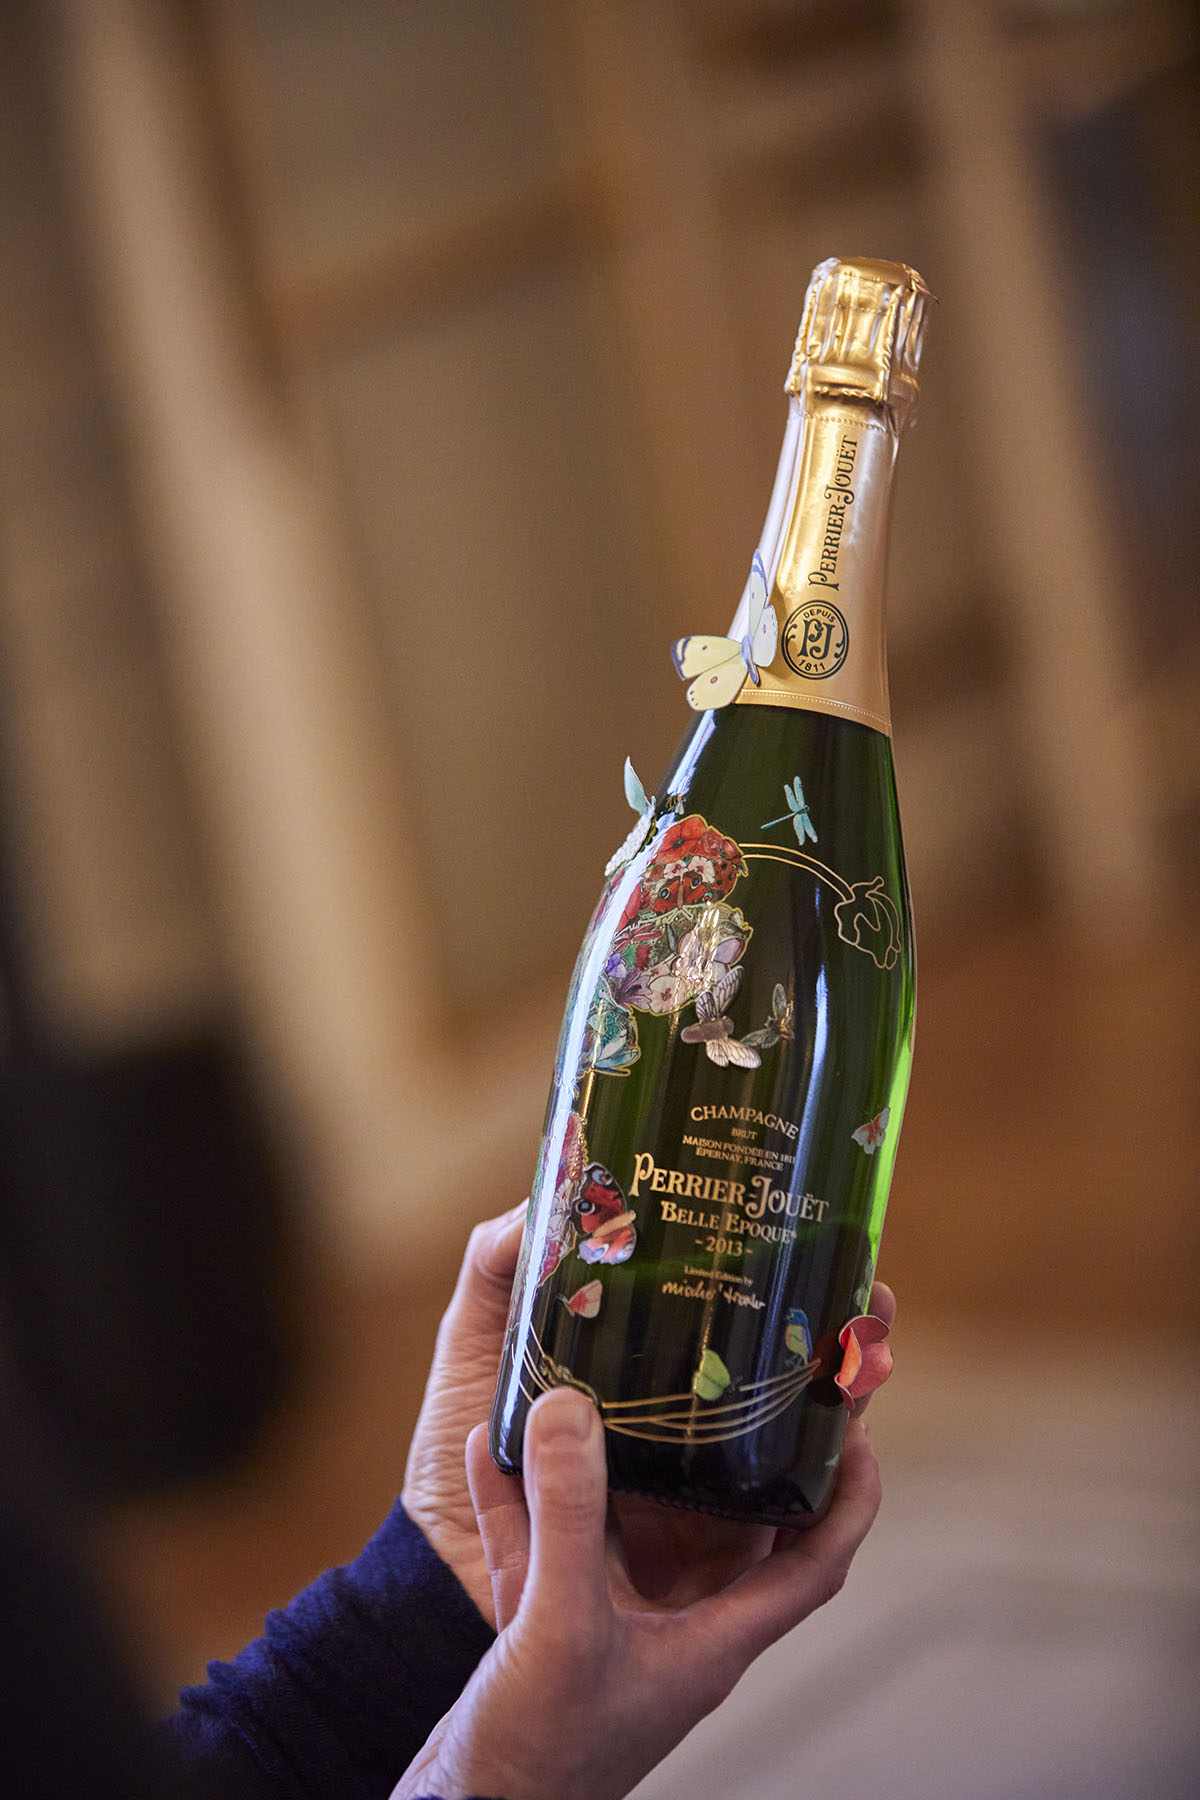 A bottle of champagne with flowers and butterflies on it